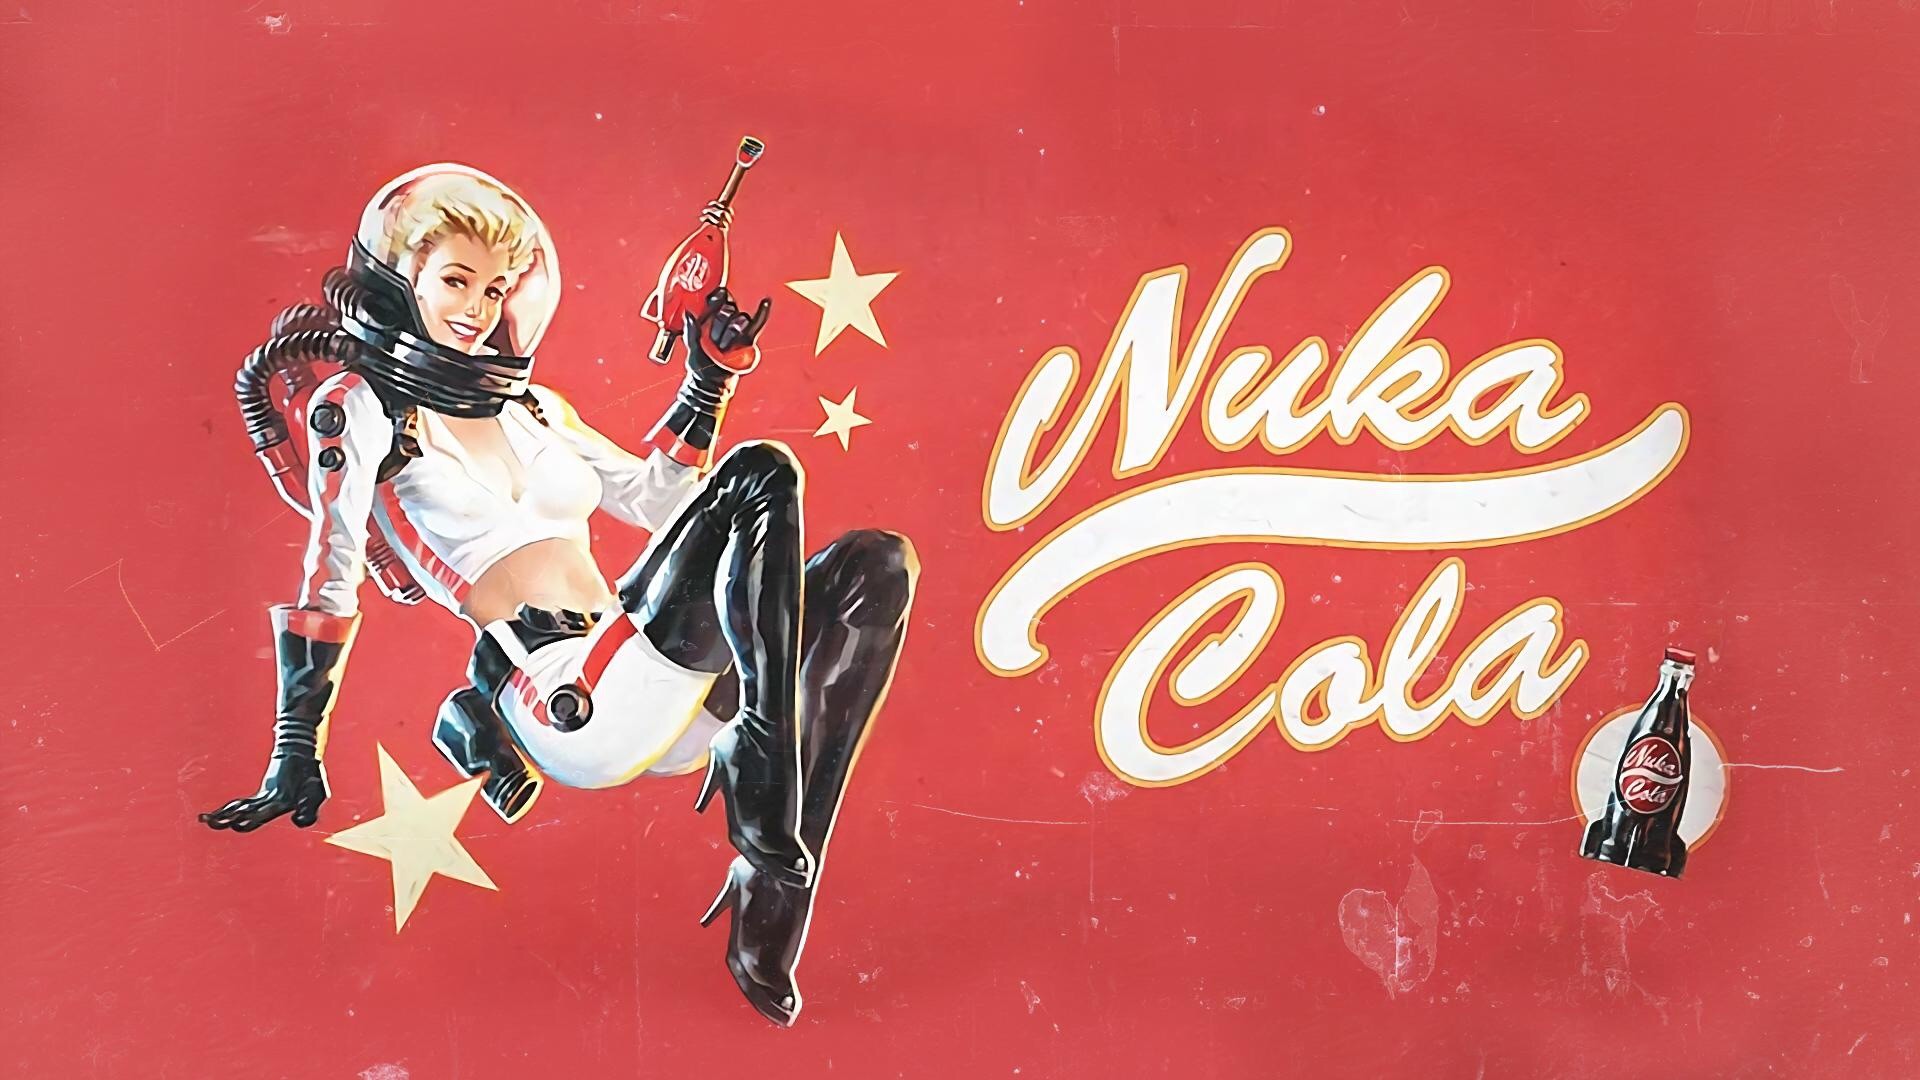 General 1920x1080 pinup models vintage Fallout Fallout 4 video games Nuka-Cola PC gaming red background science fiction women video game art